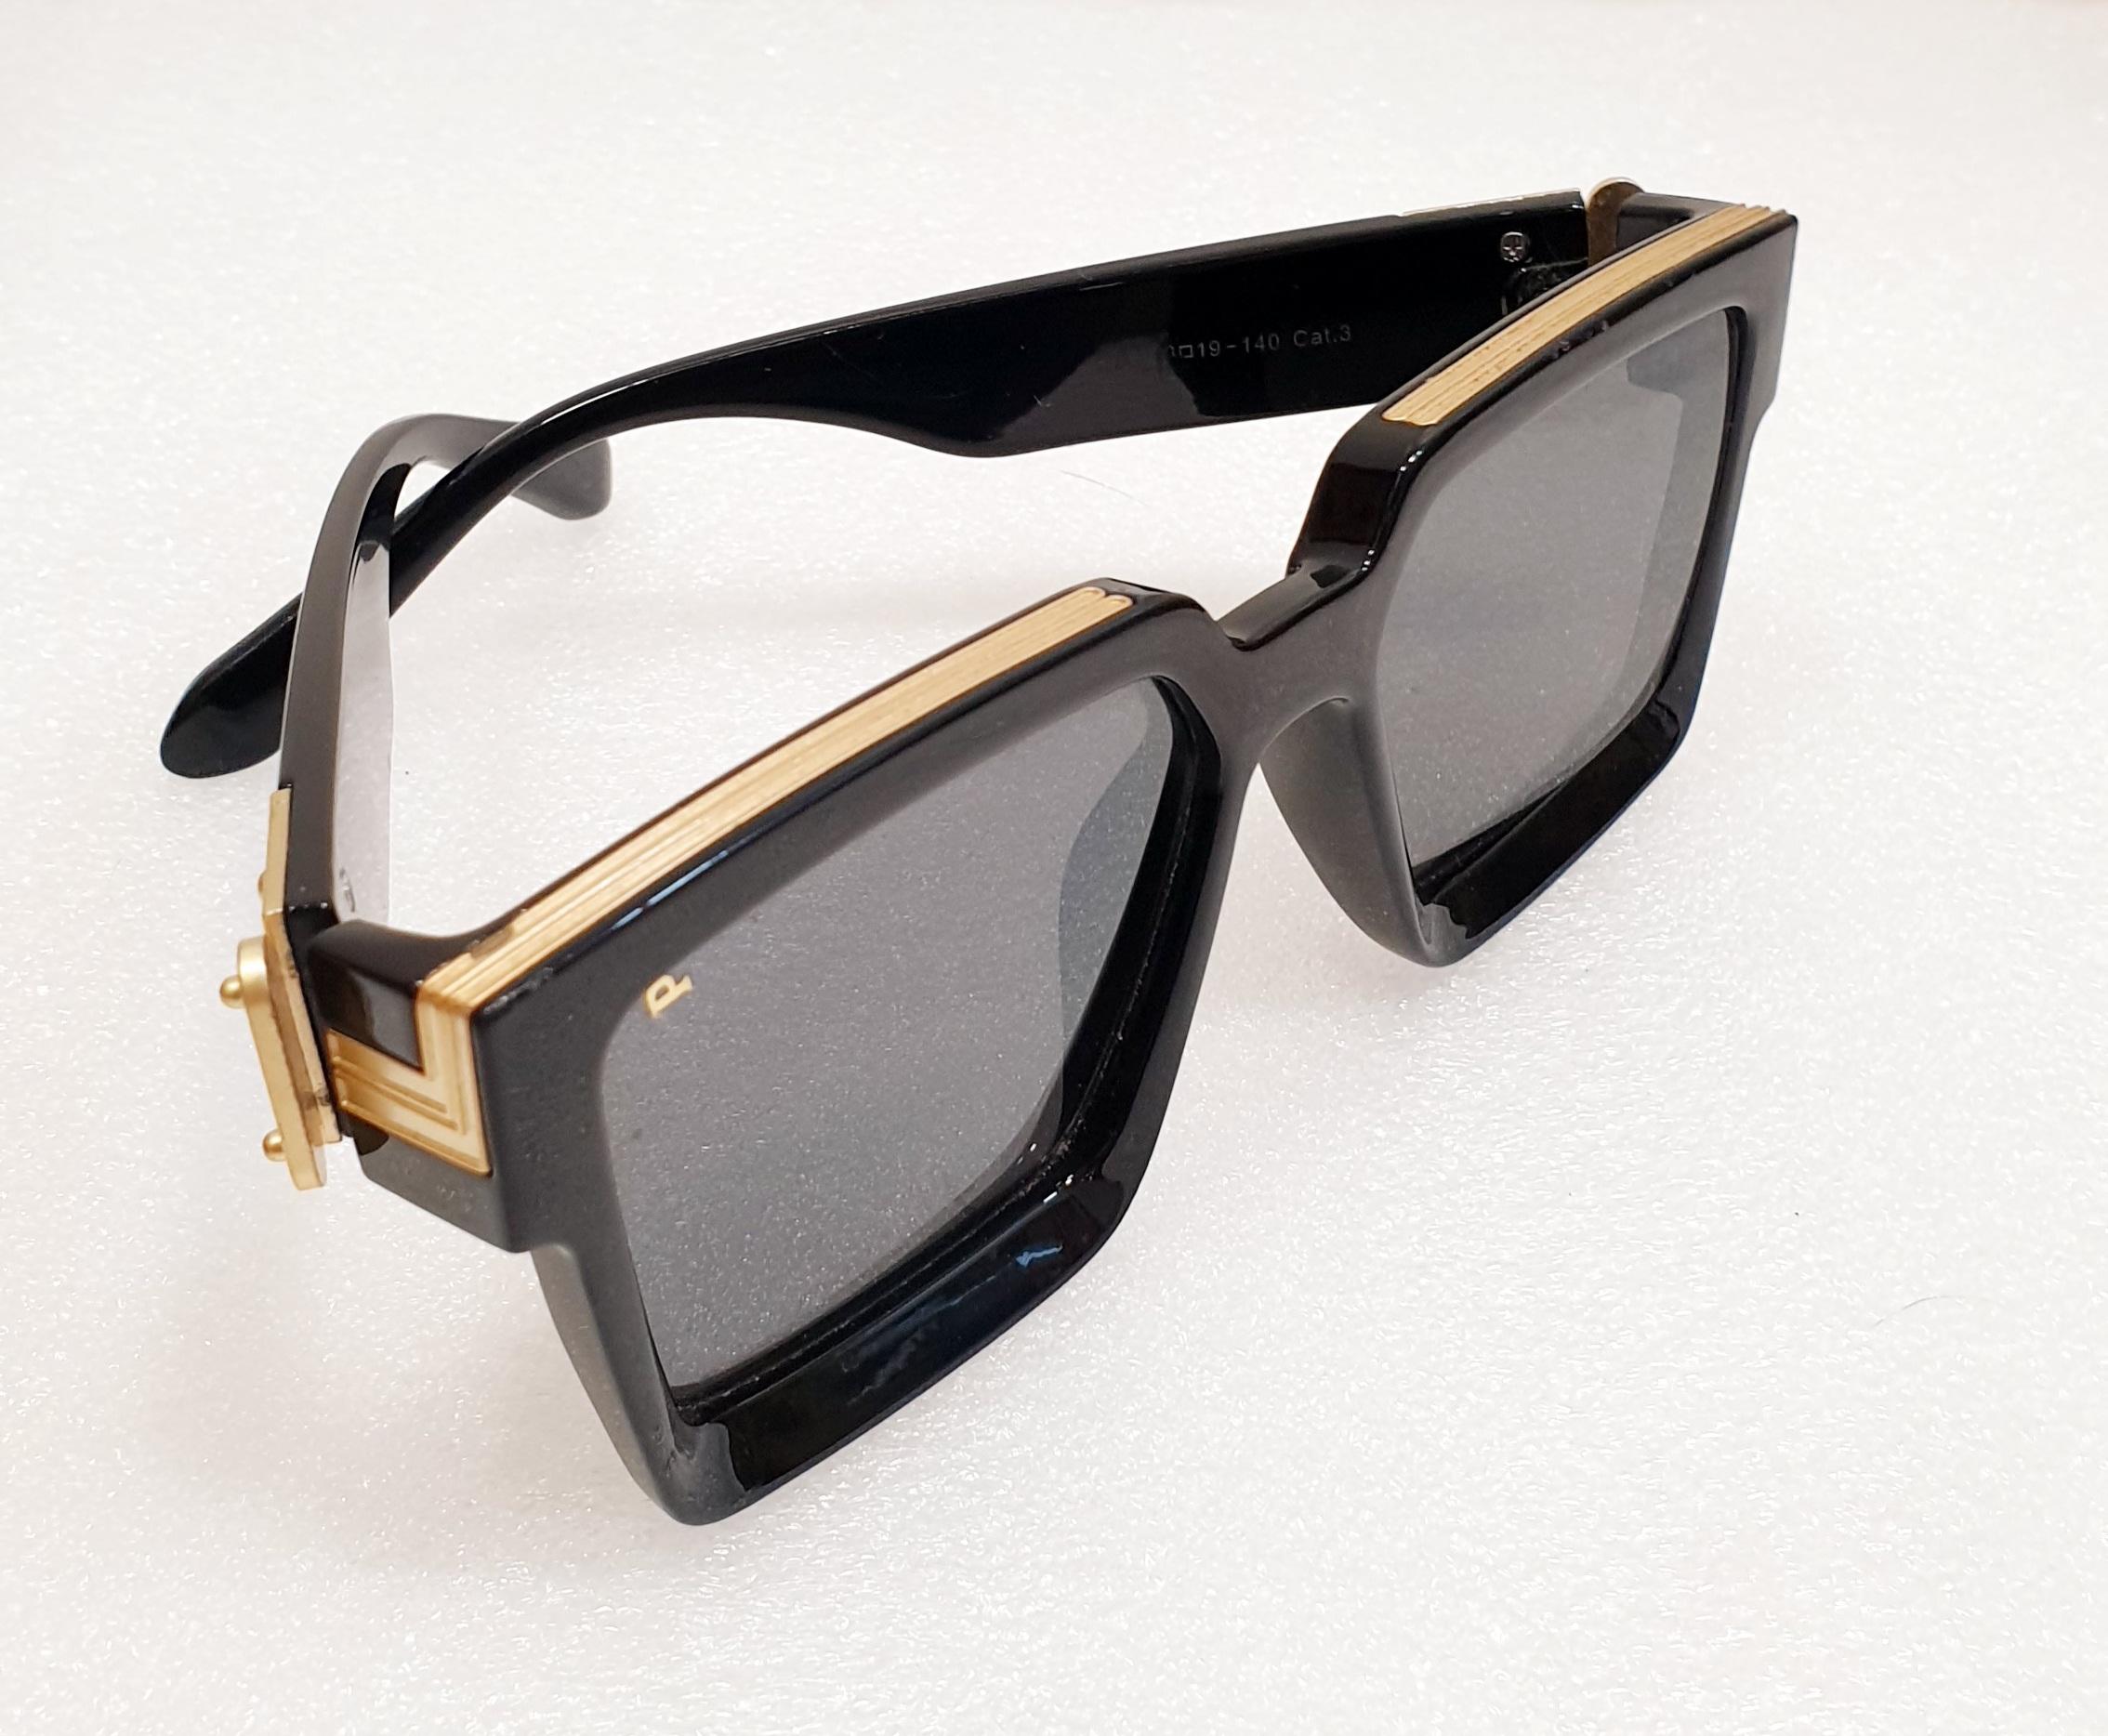 Prada Vintage  Sunglasses
Mark	Prada
Lens material	 Acetate
With polarized lens	Yes
Other features
With UV protection : Yes
Gender : Female

READY TO SHIP
*Shipment of this piece is not affected by COVID-19. Orders welcome!*

Pradera Fashion